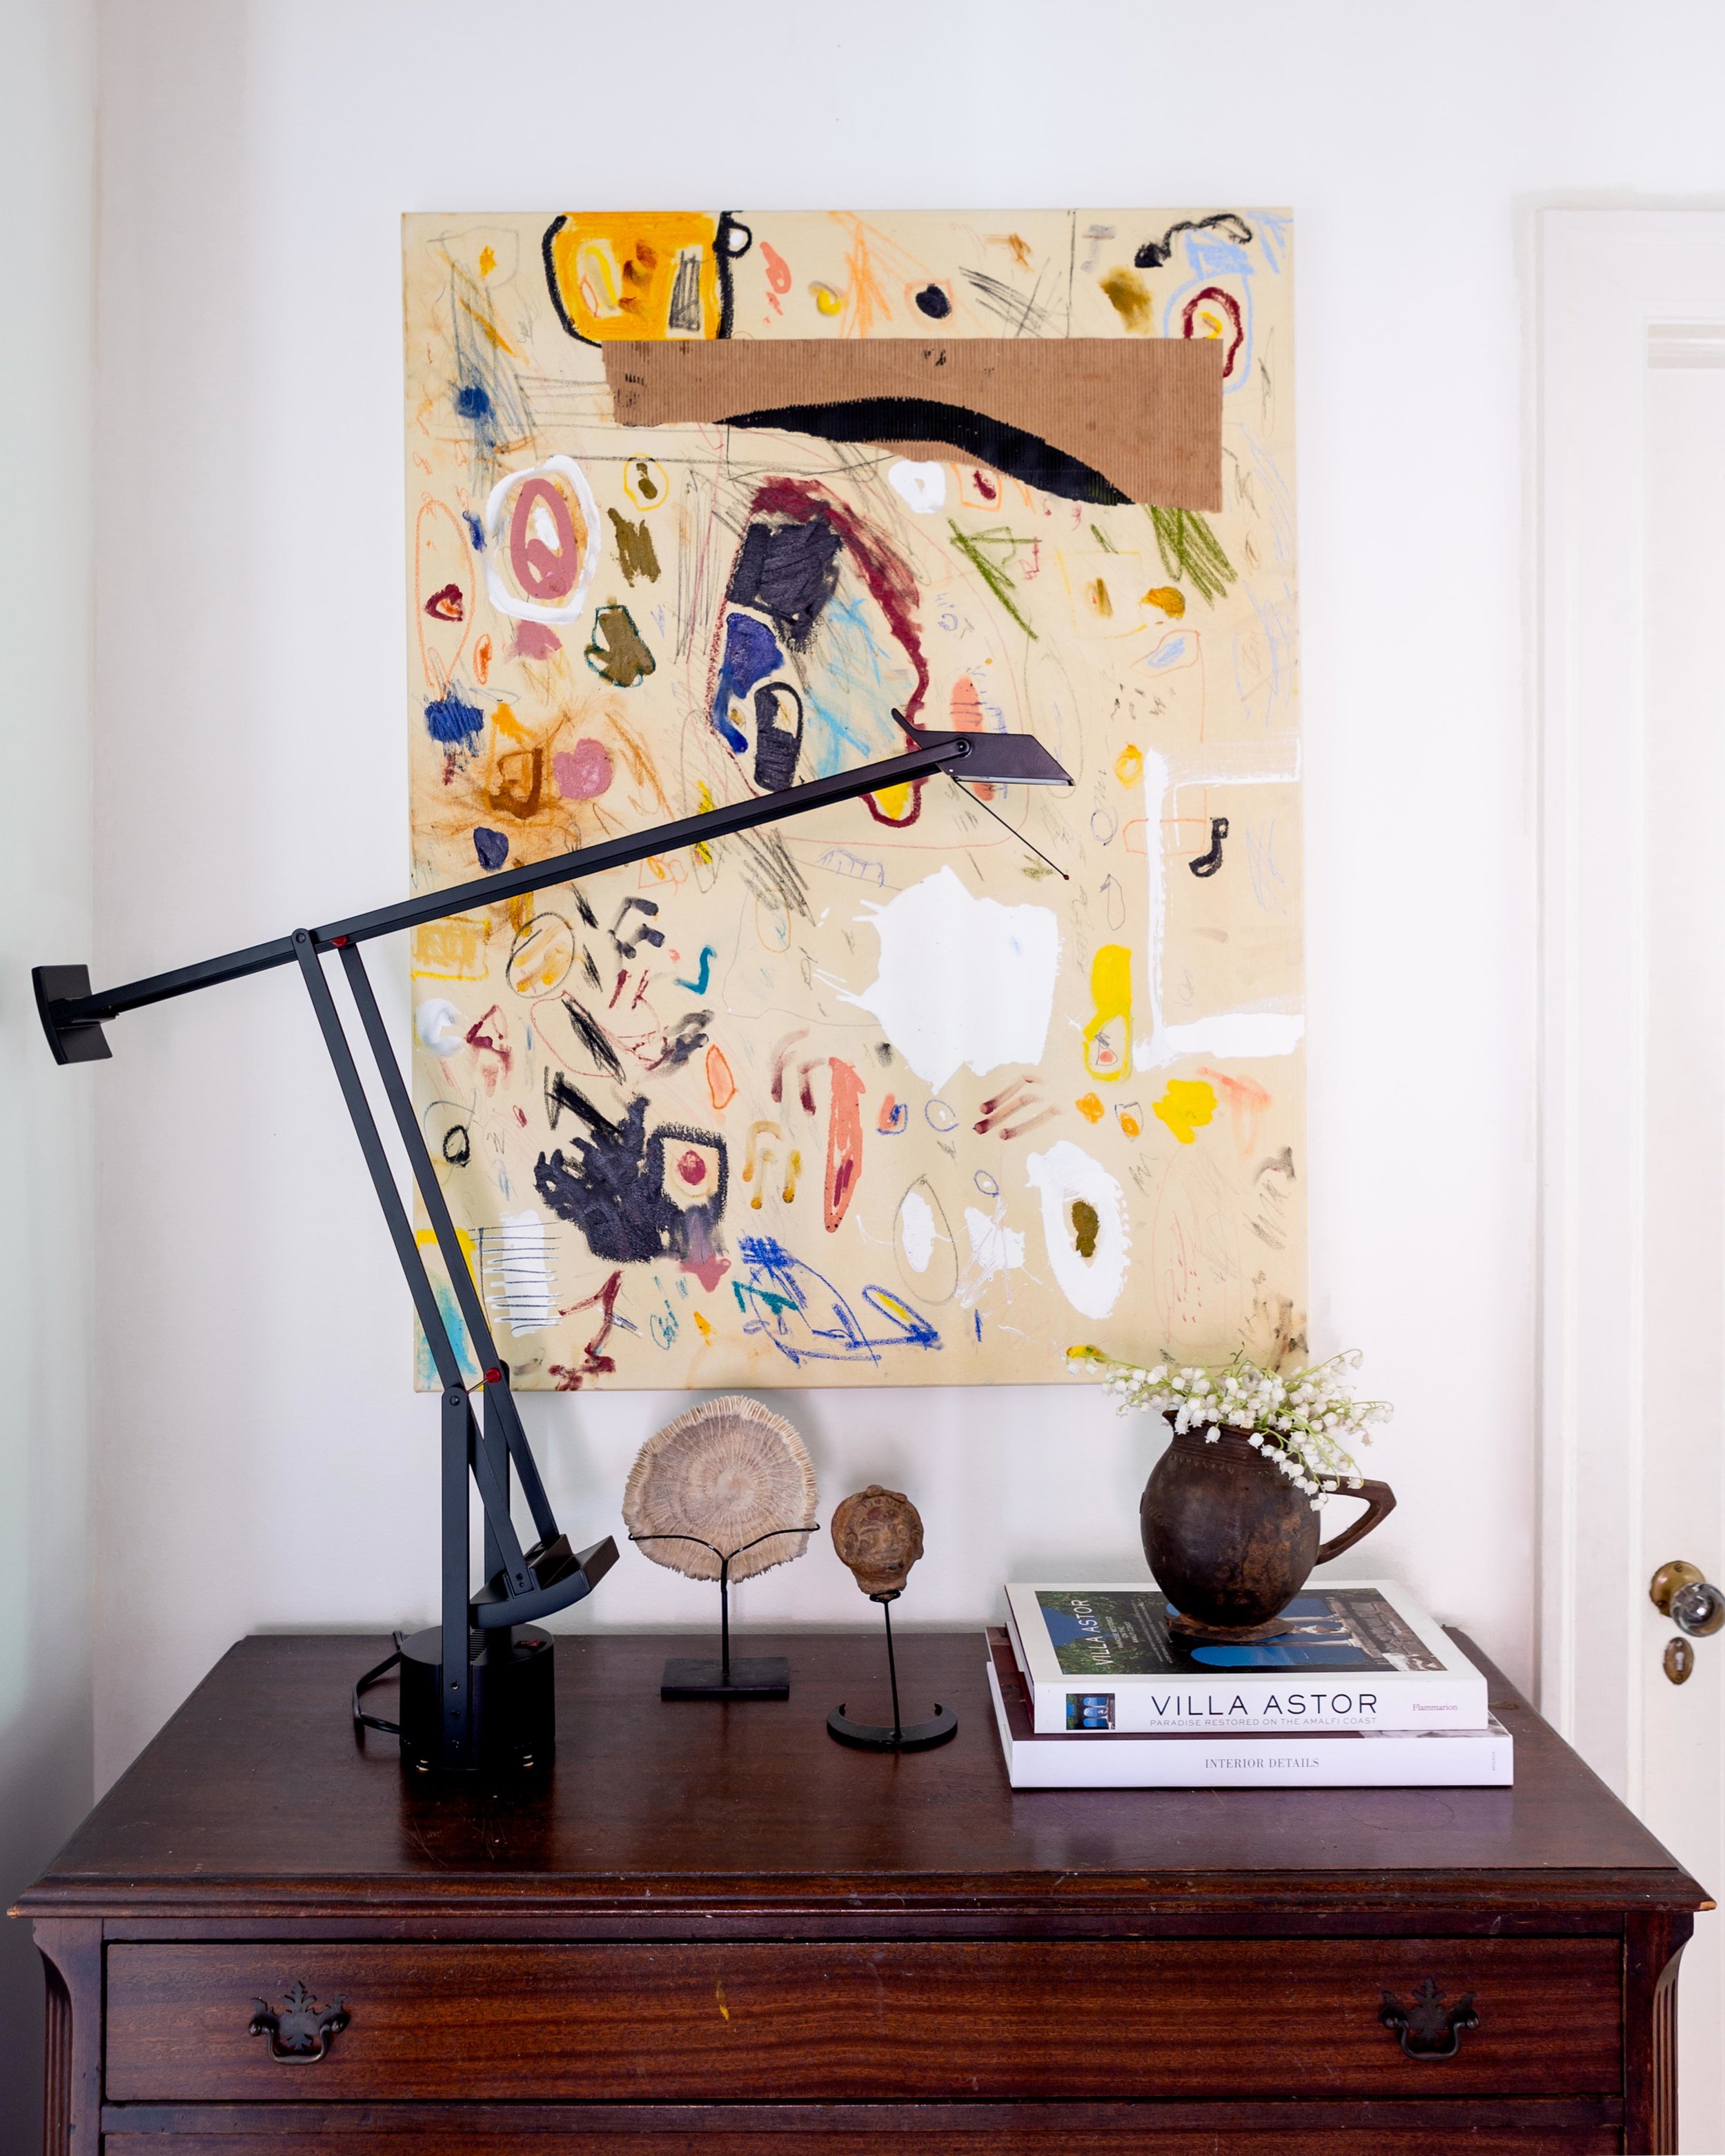 One of McLure’s abstract canvases is hung above an antique chest that he’s had since he was 13. The sculptures were Christmas gifts from Mama McLure.